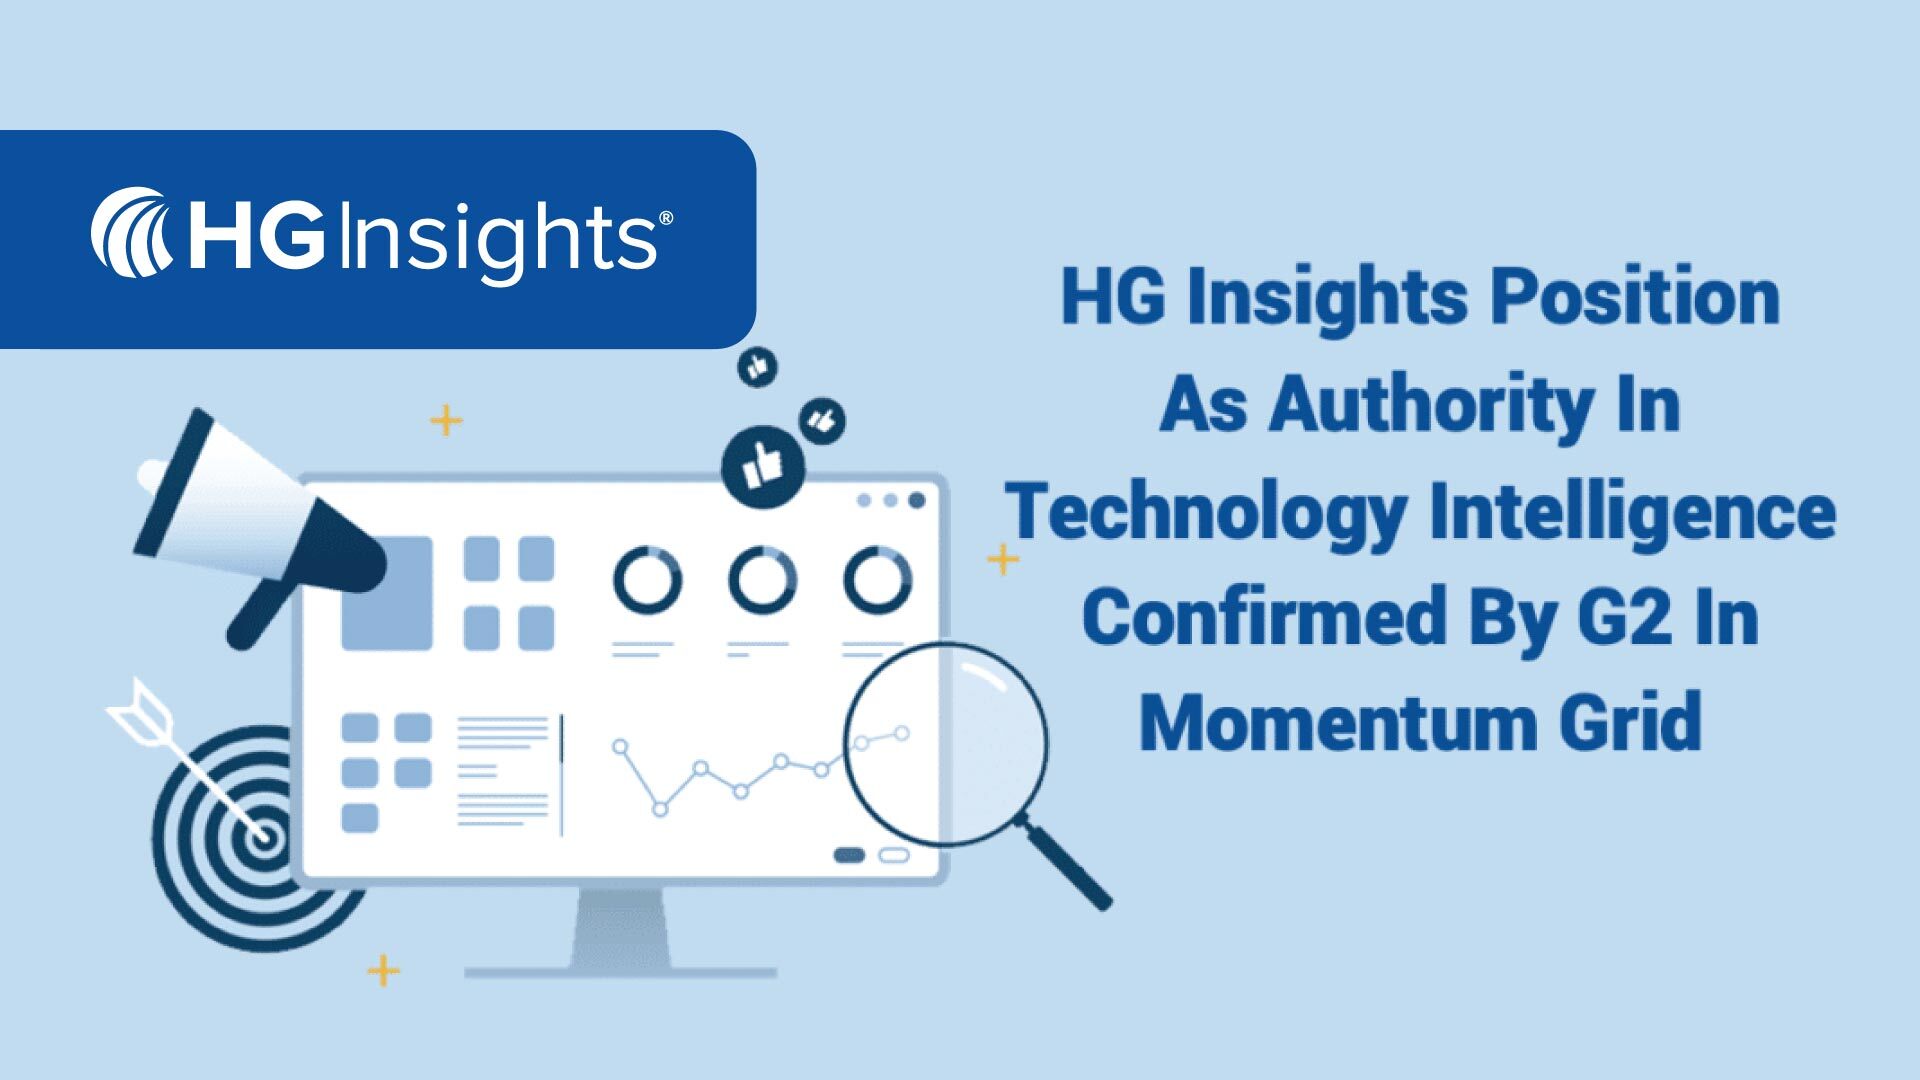 HG Insights Position As Authority In Technology Intelligence Confirmed By G2 In Momentum Grid